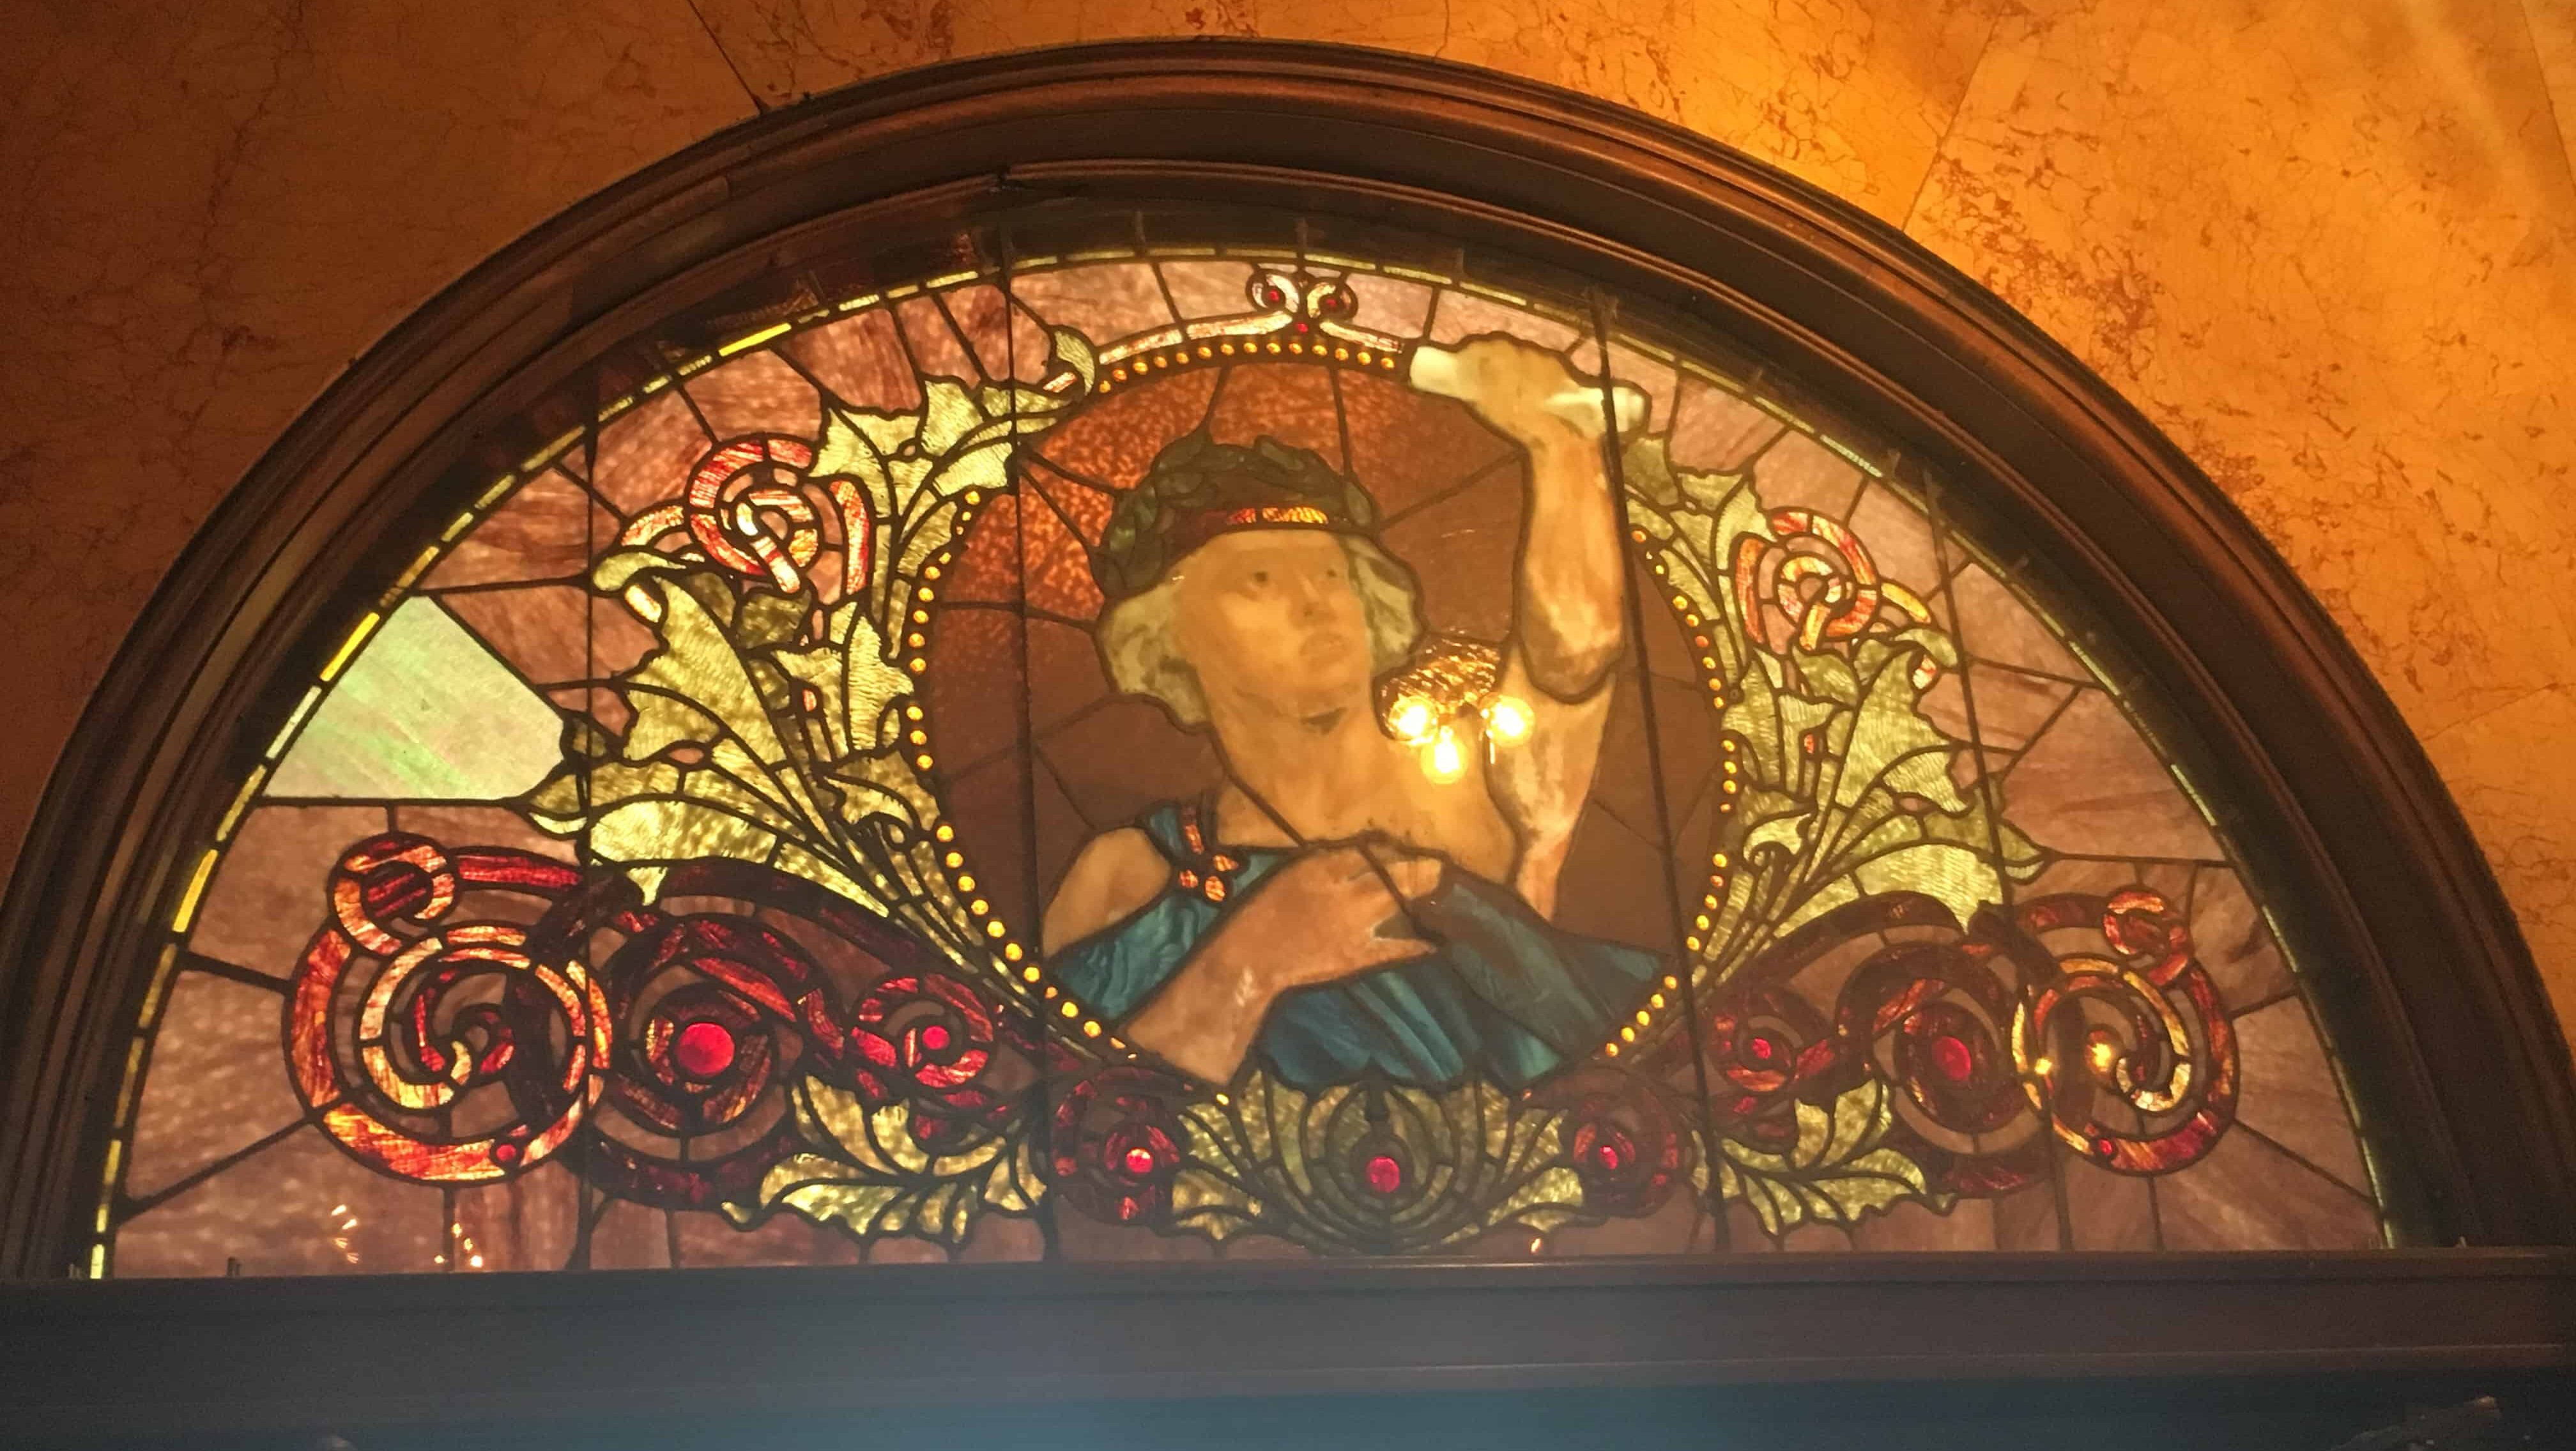 Stained glass in the Auditorium Theatre in Chicago, Illinois